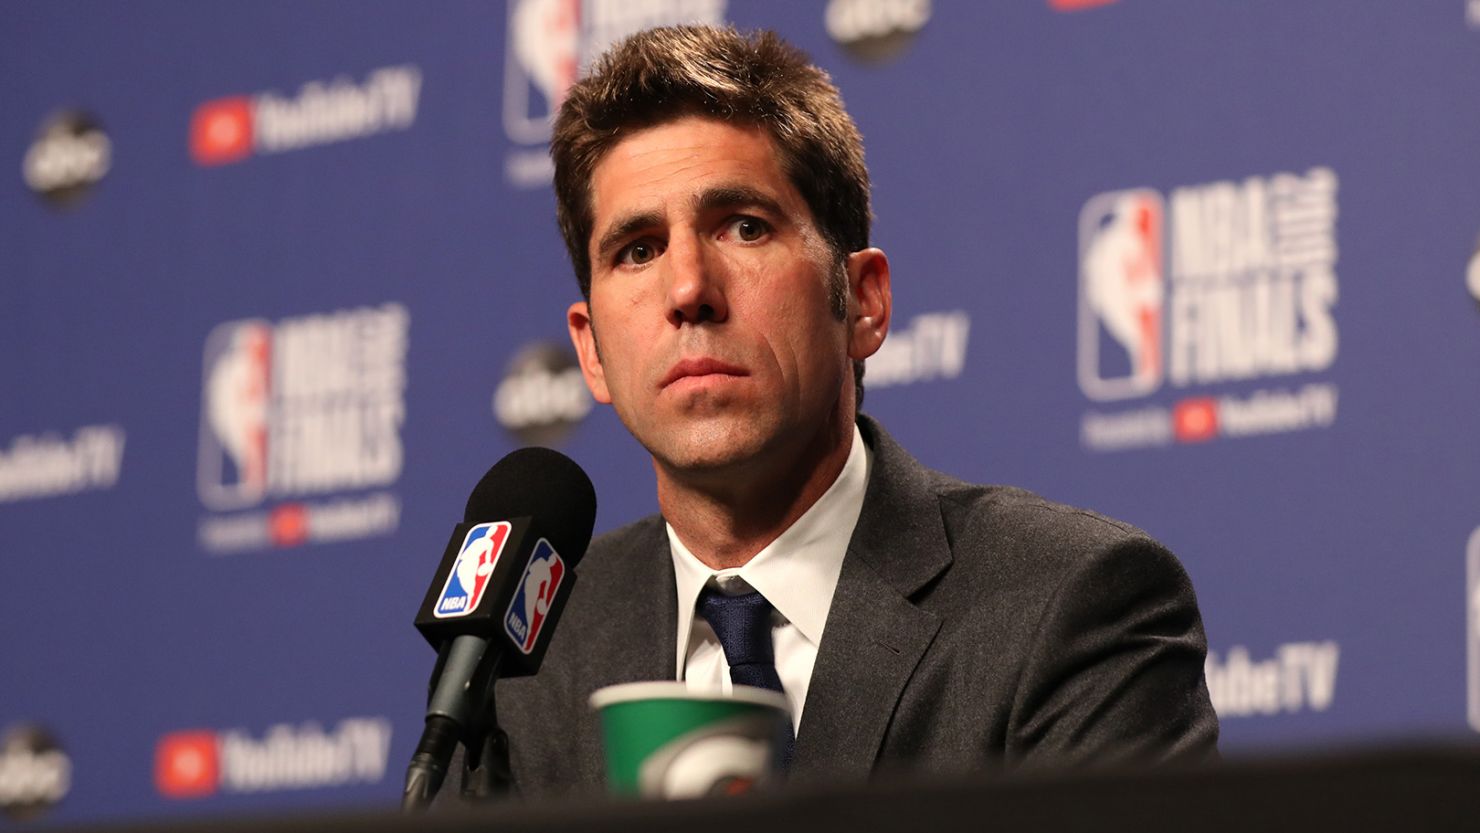 TORONTO, ON - JUNE 10: Golden State Warriors General Manager, Bob Myers, is interviewed after a game against the Toronto Raptors after Game Five of the 2019 NBA Finals on June 10, 2019 at Scotiabank Arena in Toronto, Ontario, Canada. NOTE TO USER: User expressly acknowledges and agrees that, by downloading and or using this photograph, User is consenting to the terms and conditions of the Getty Images License Agreement. Mandatory Copyright Notice: Copyright 2019 NBAE (Photo by Cole Burston/NBAE via Getty Images)